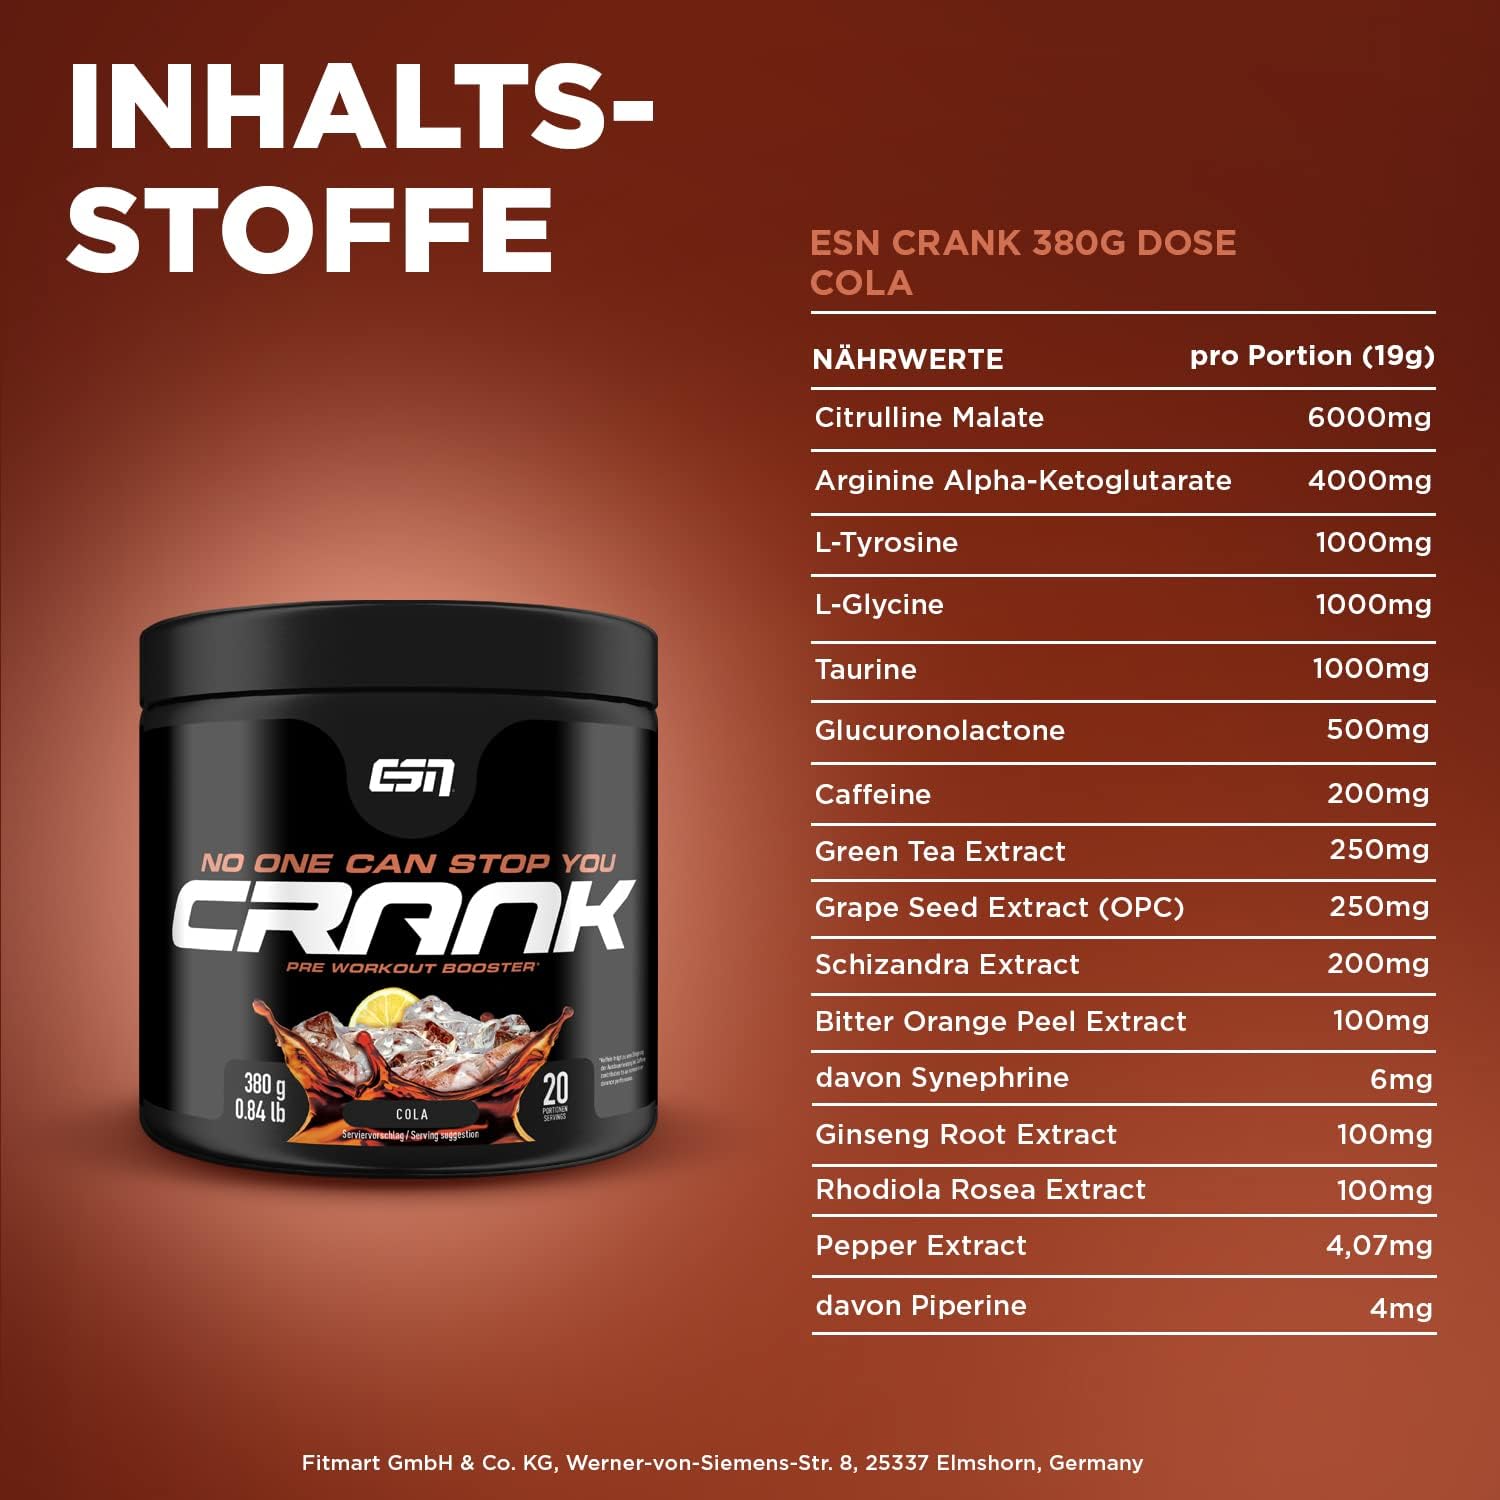 ESN Crank Booster 380g - BOOSTER/PRE/POST-WORKOUT